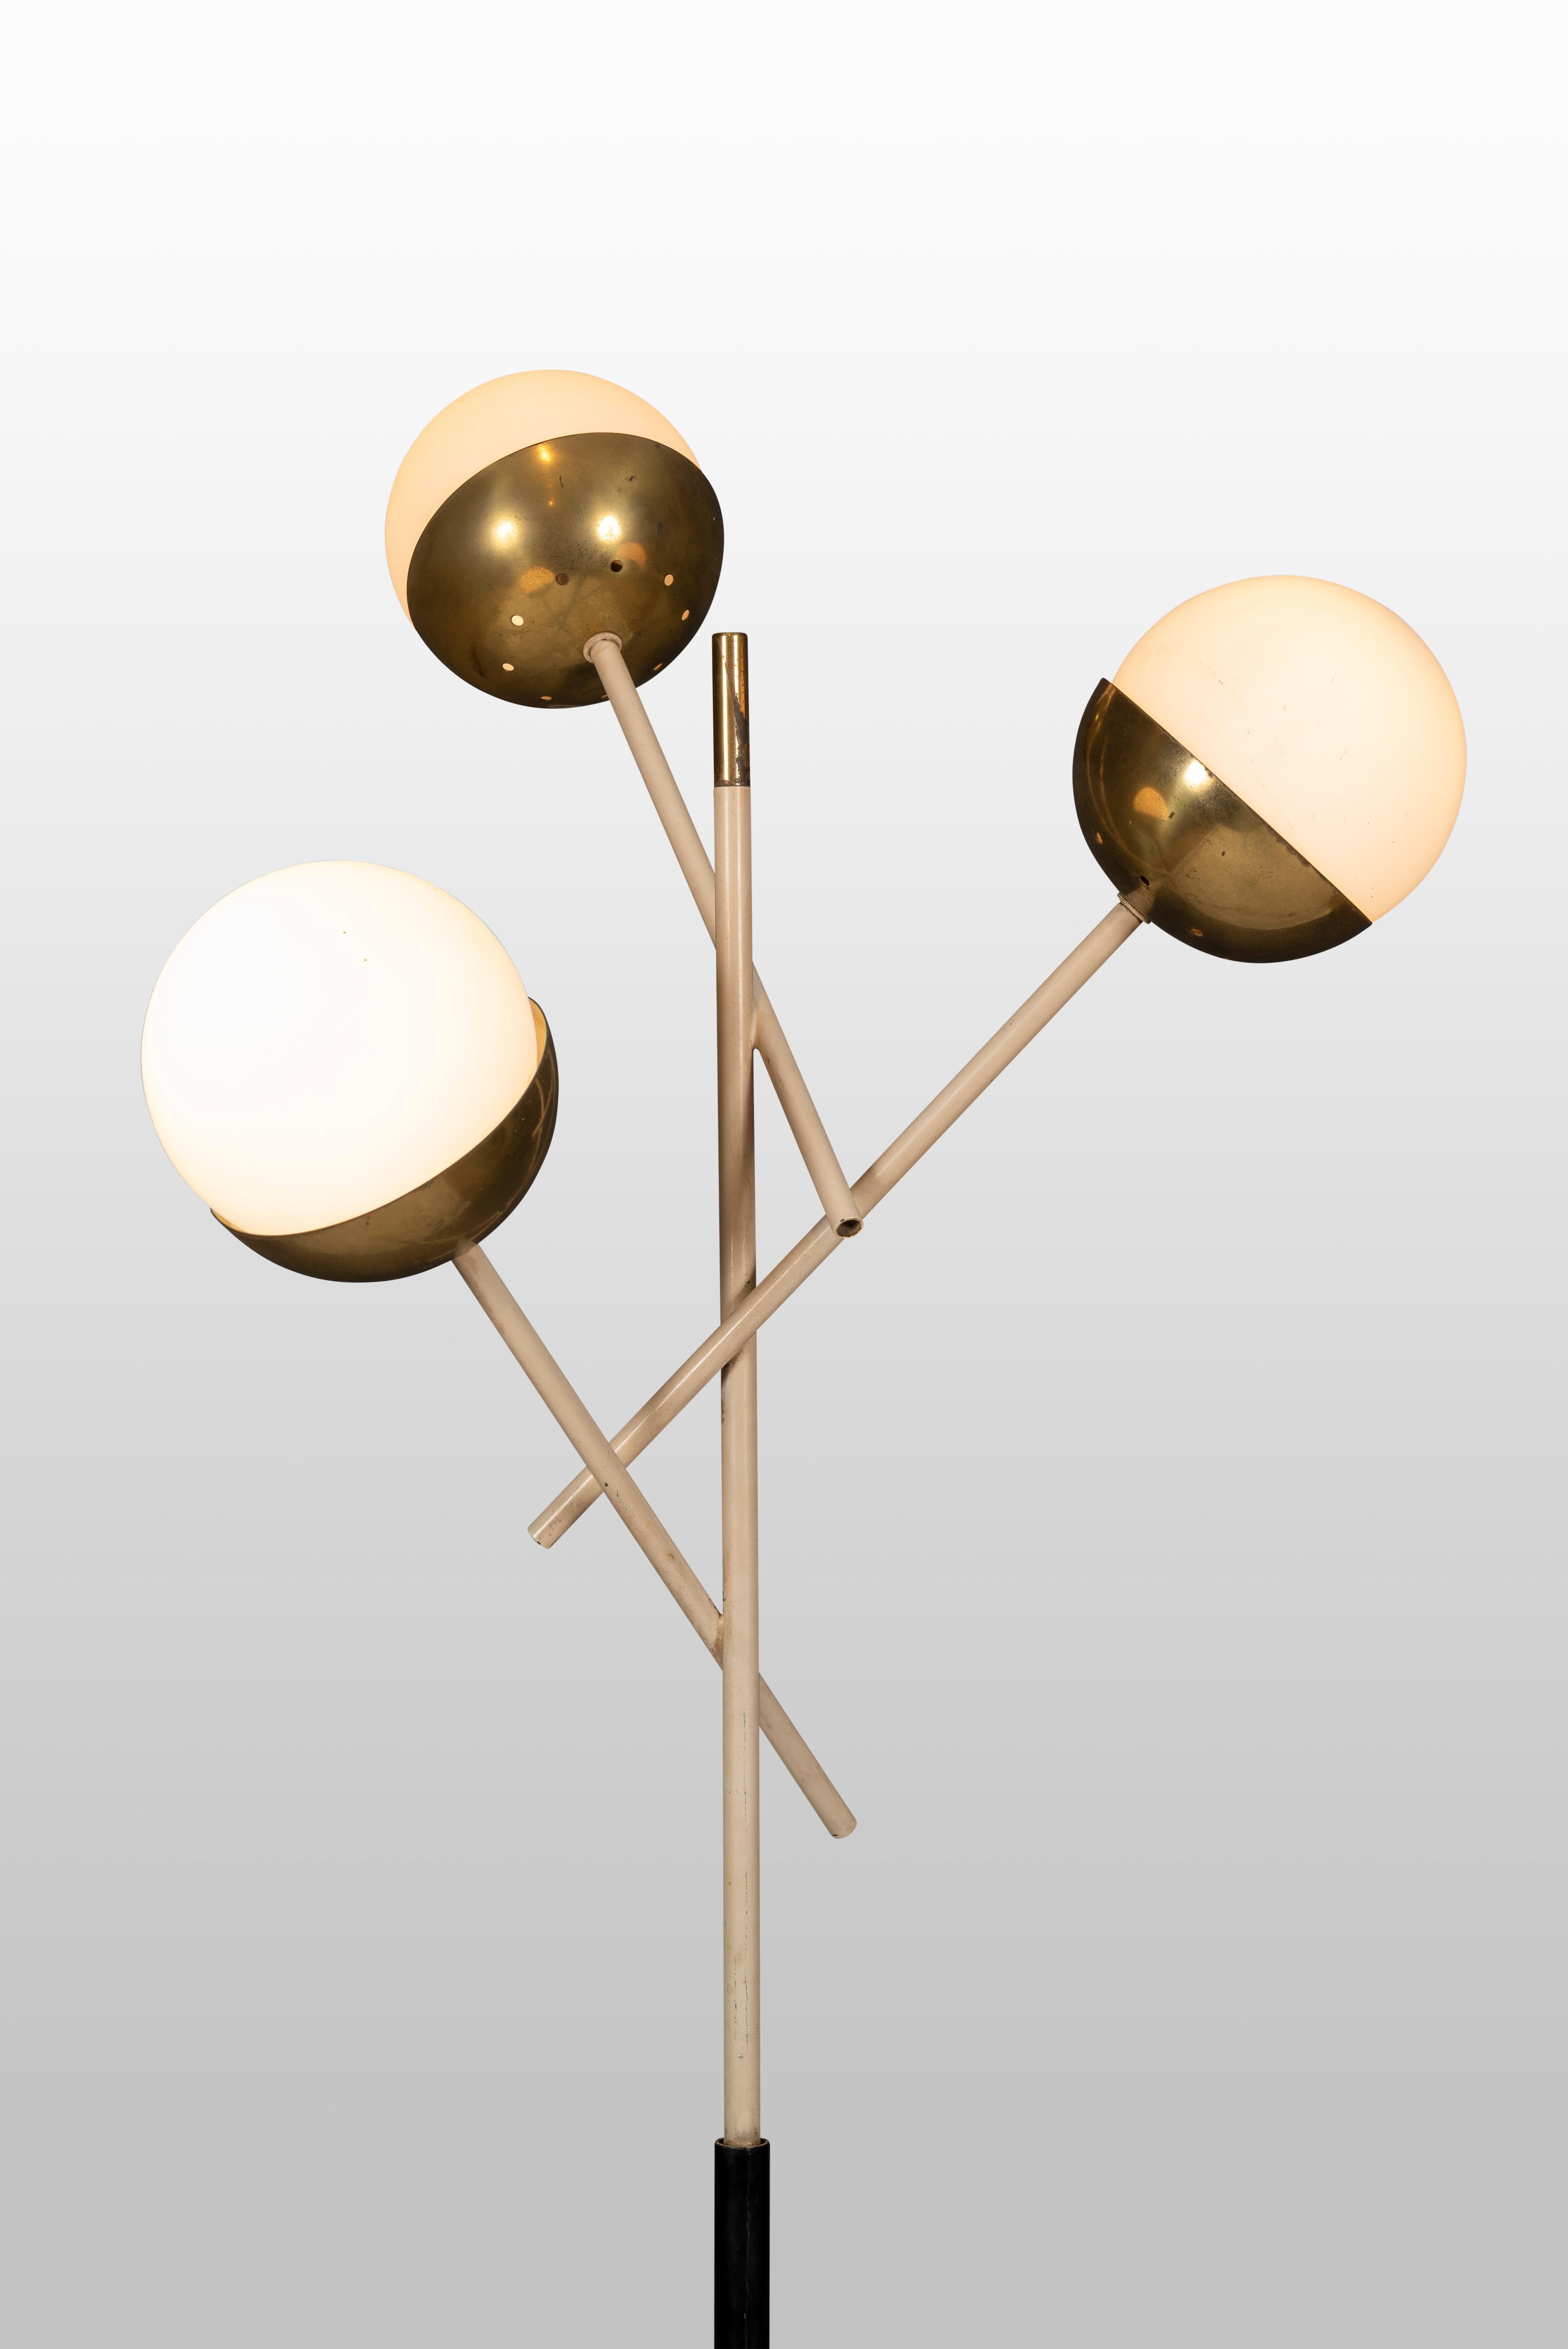 Stilnovo floor lamp with three opaline glass lantern shades suspended on gilt lacquer arms and black enameled stem ending on Carrara marble base, Italy, 1950s.